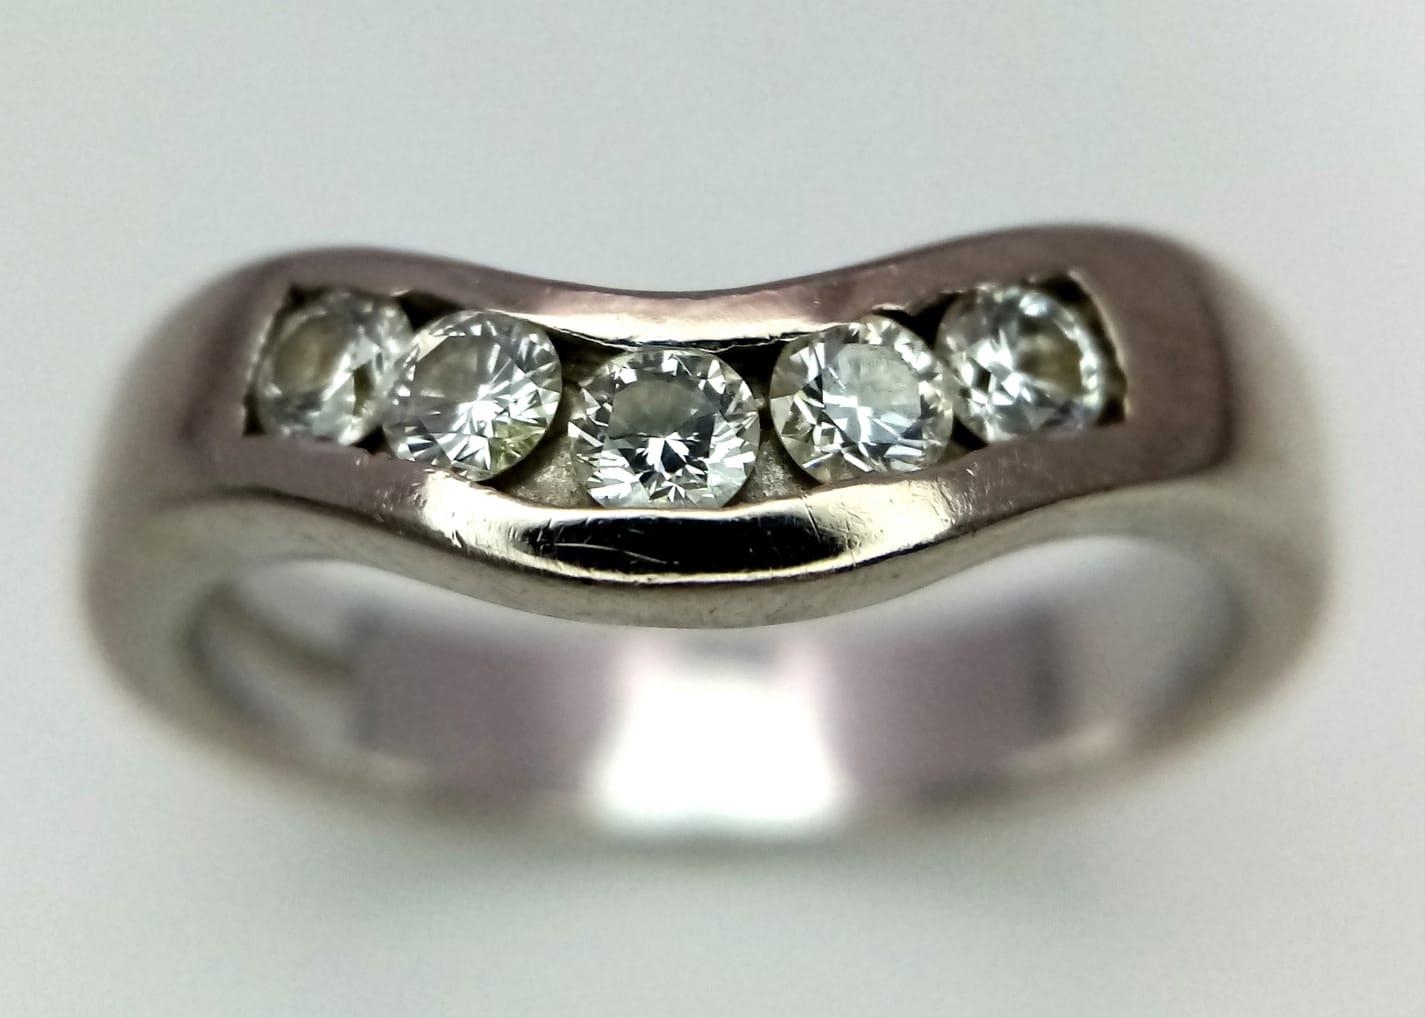 An 18K White Gold Five Stone Diamond Ring. 0.25ctw. Size M. 5.65g total weight. Ref: 14436 - Image 2 of 4